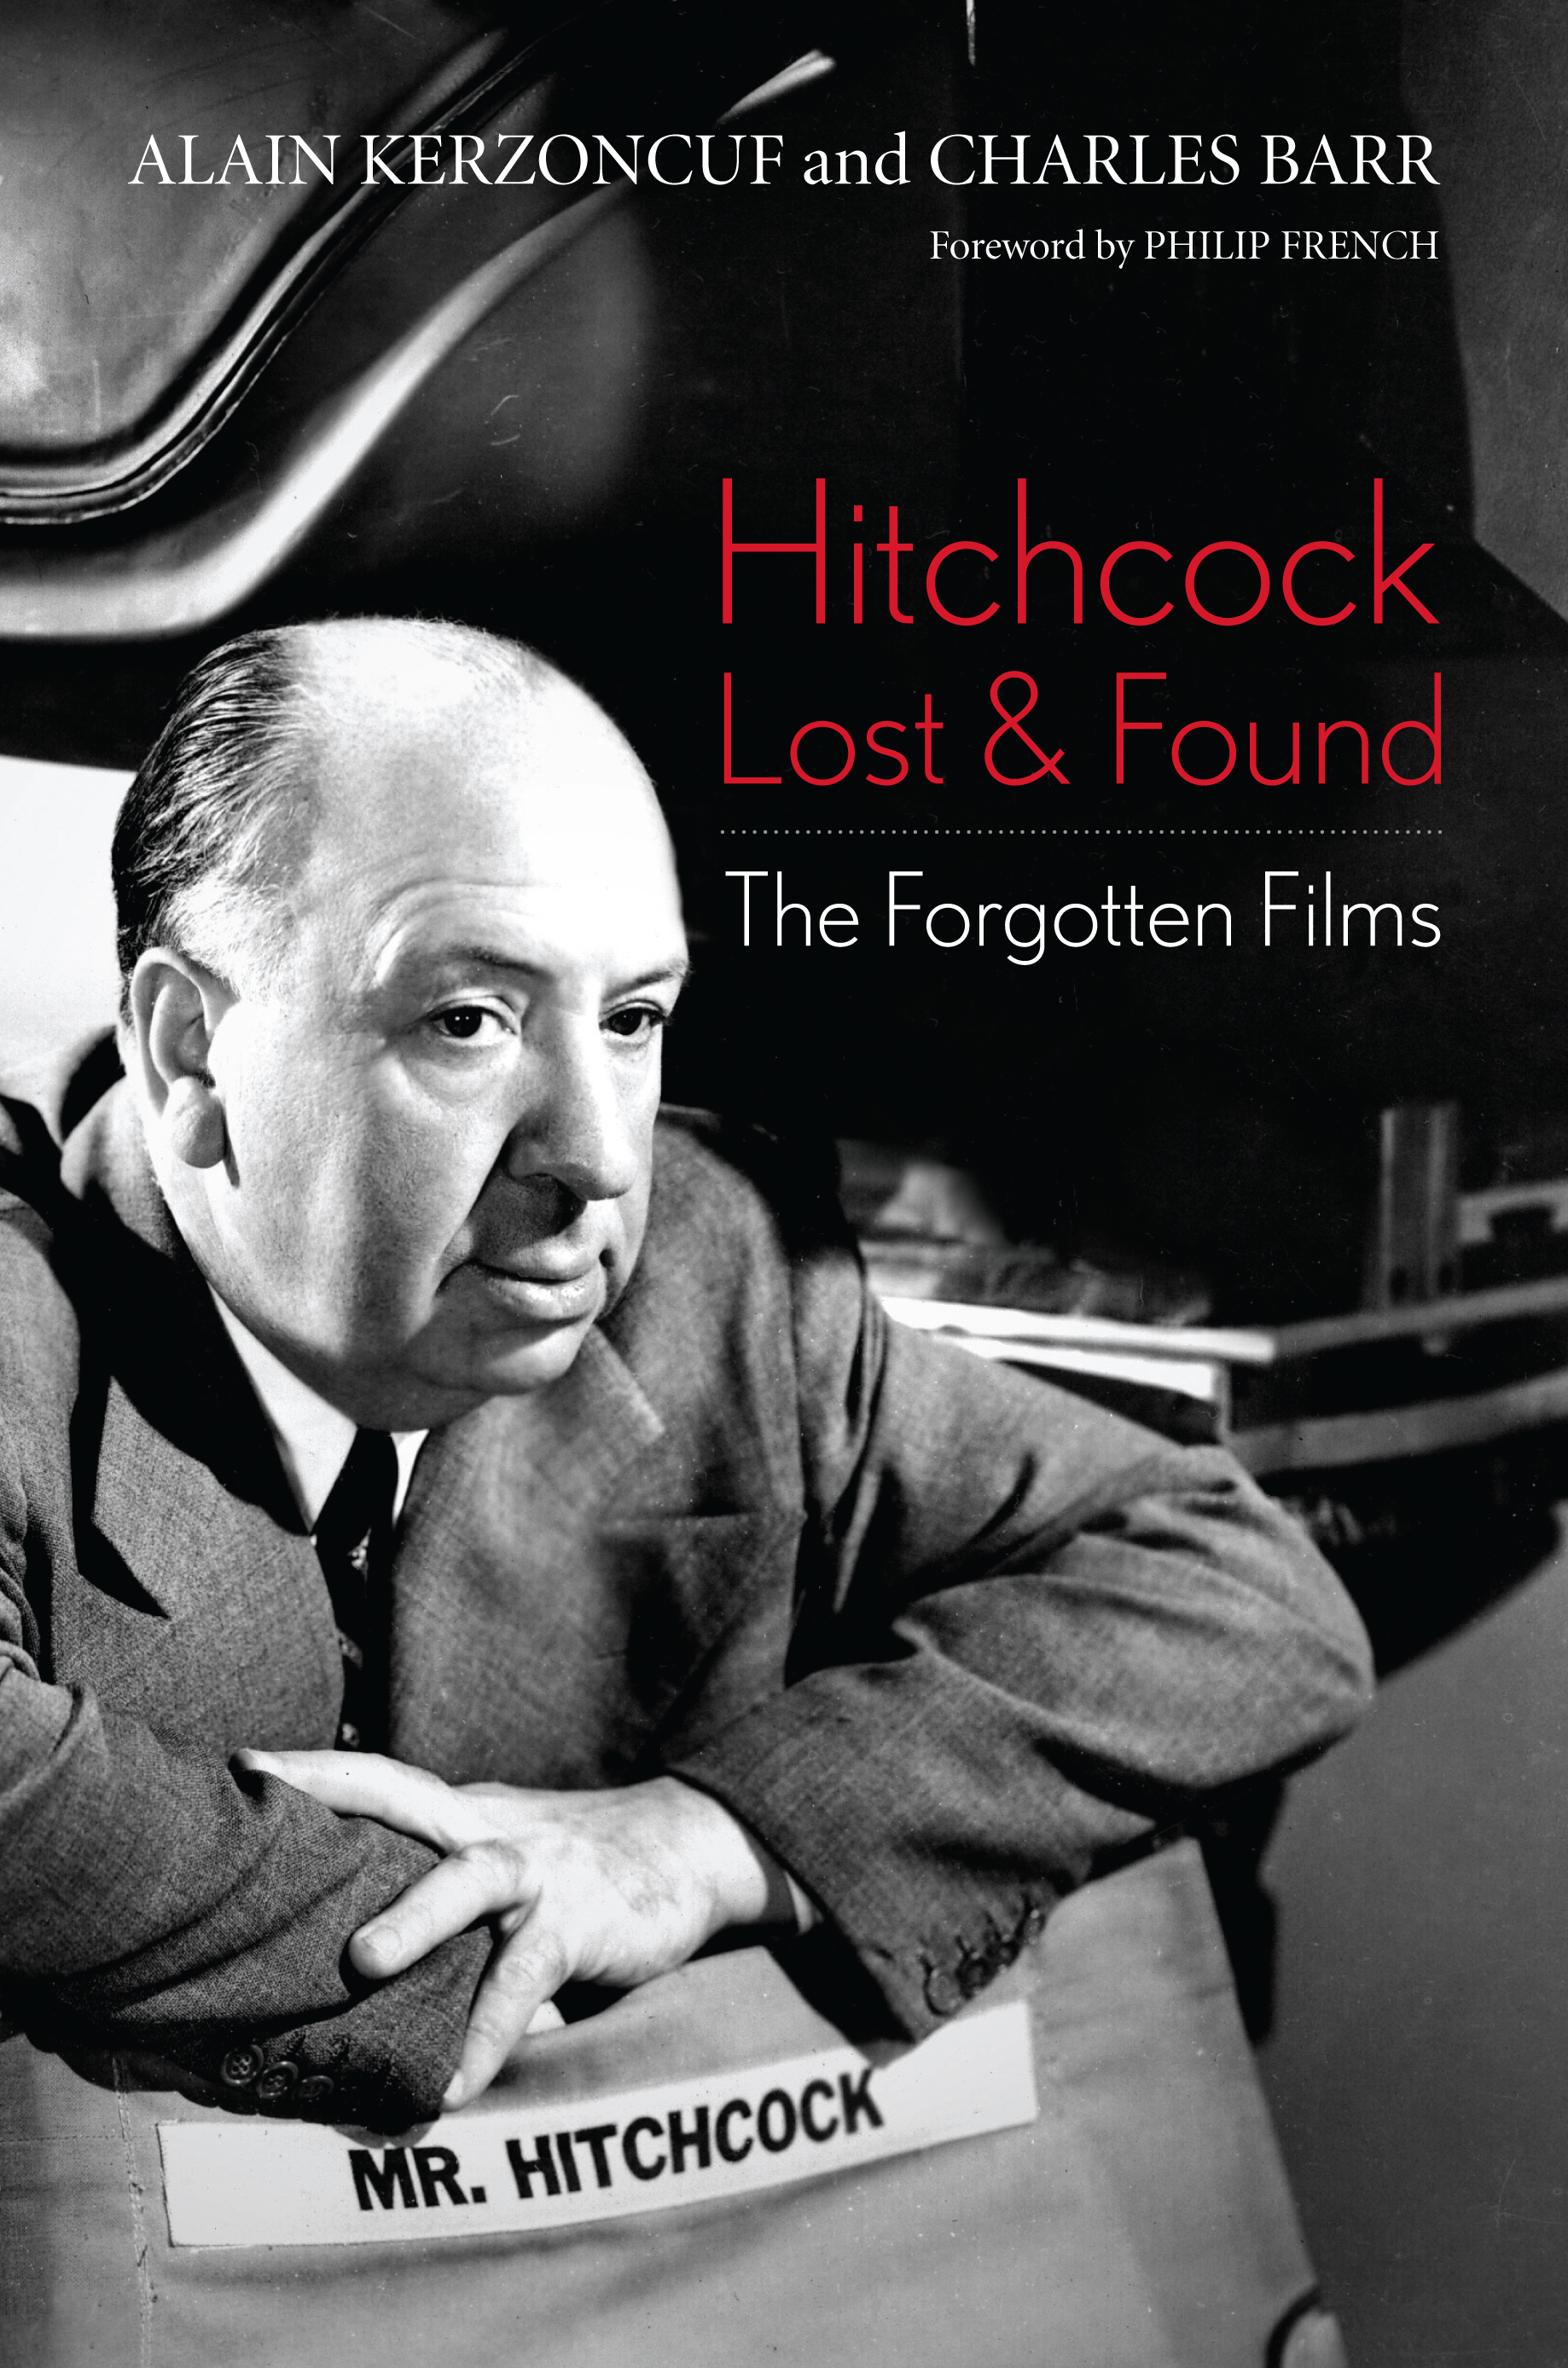 Hitchcock Lost and Found - The Forgotten Films (2015) by Alain Kerzoncuf and Charles Barr